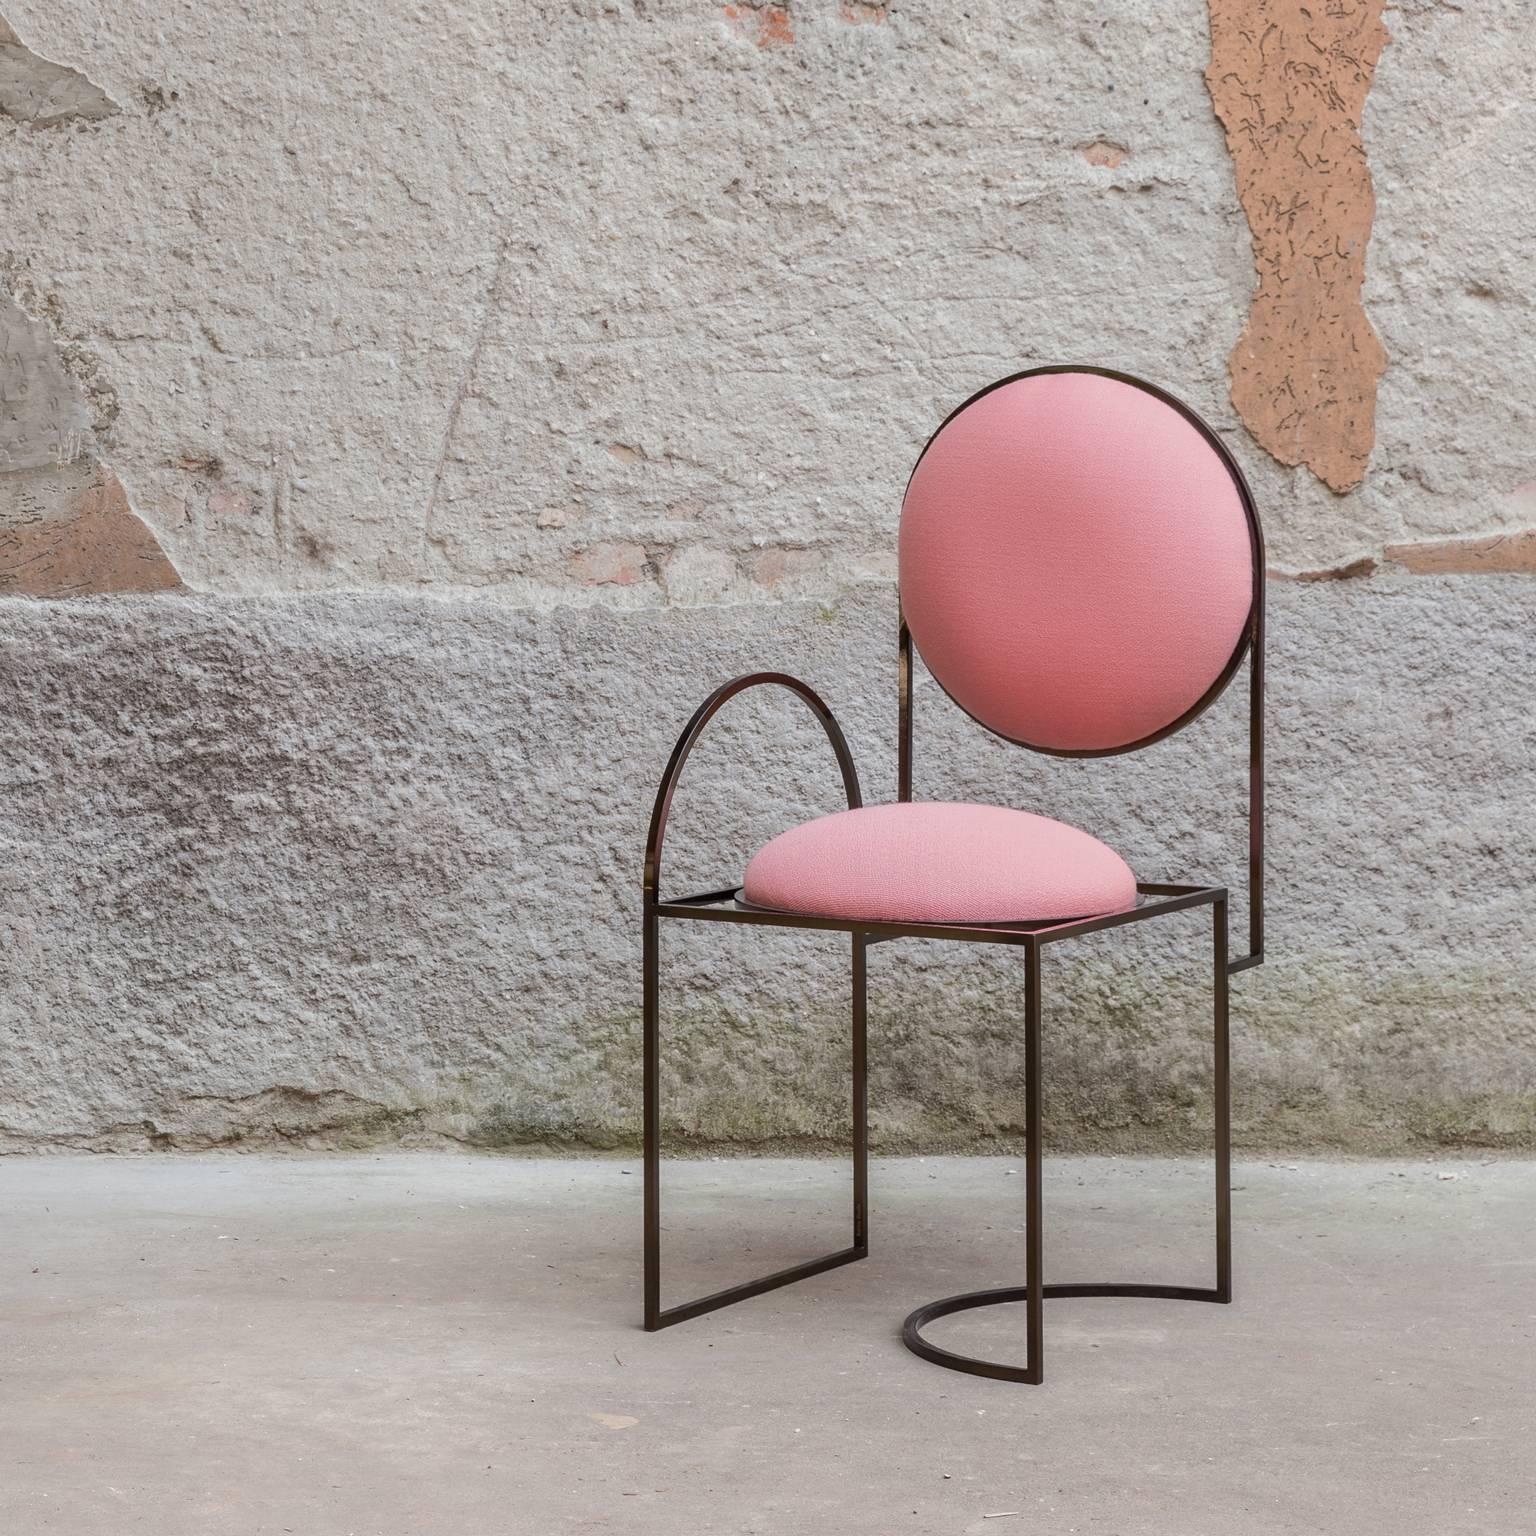 Solar Chair in Pink Wool and Black Steel Frame, by Lara Bohinc For Sale 1